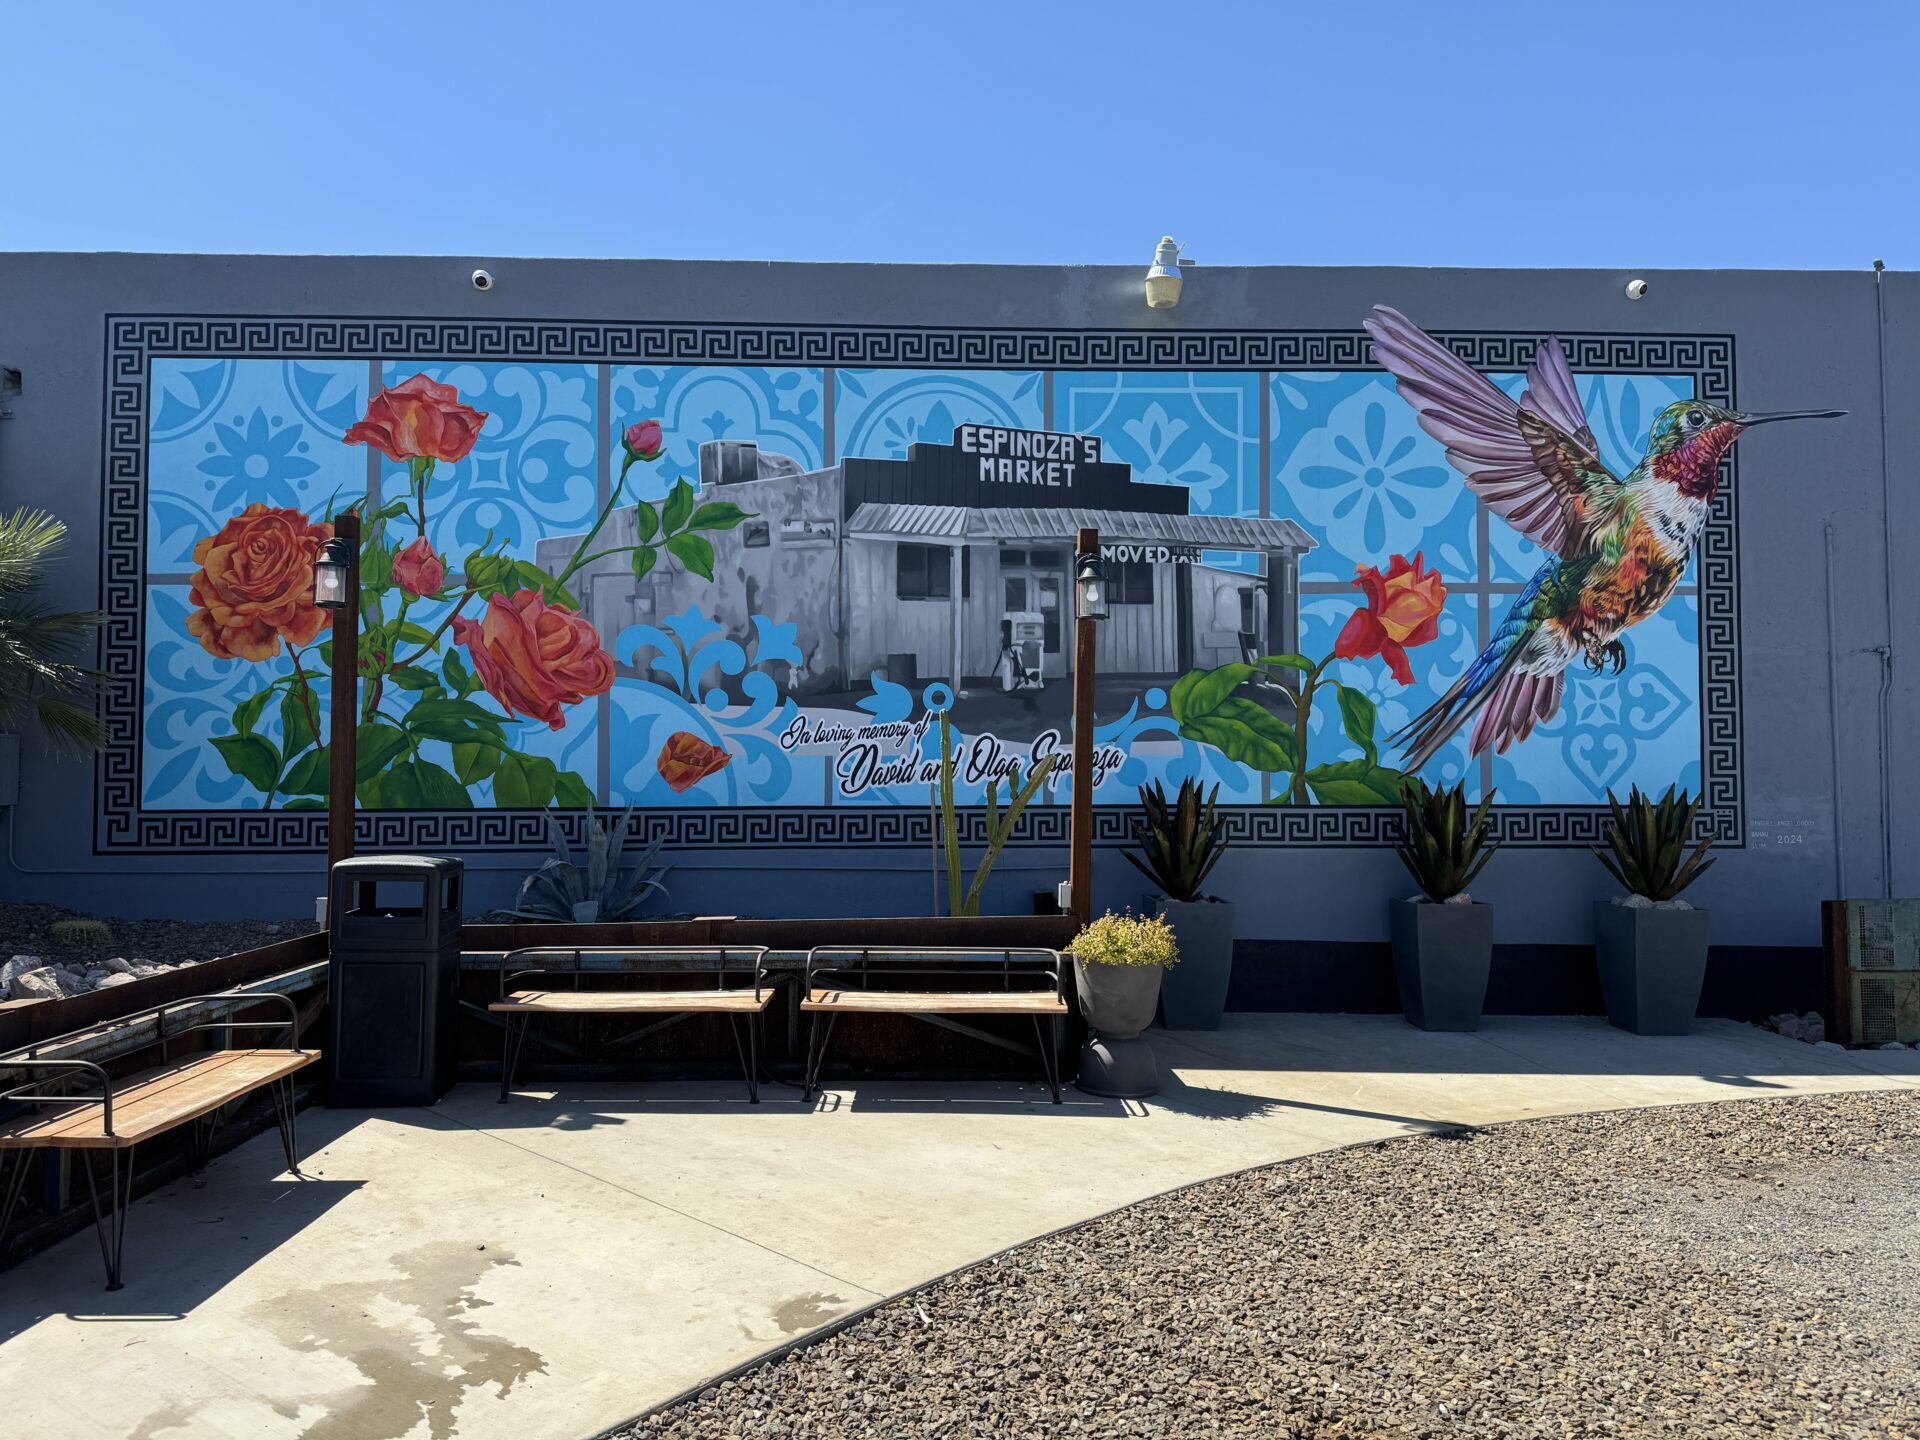 A mural of flowers and birds on the side of a building.